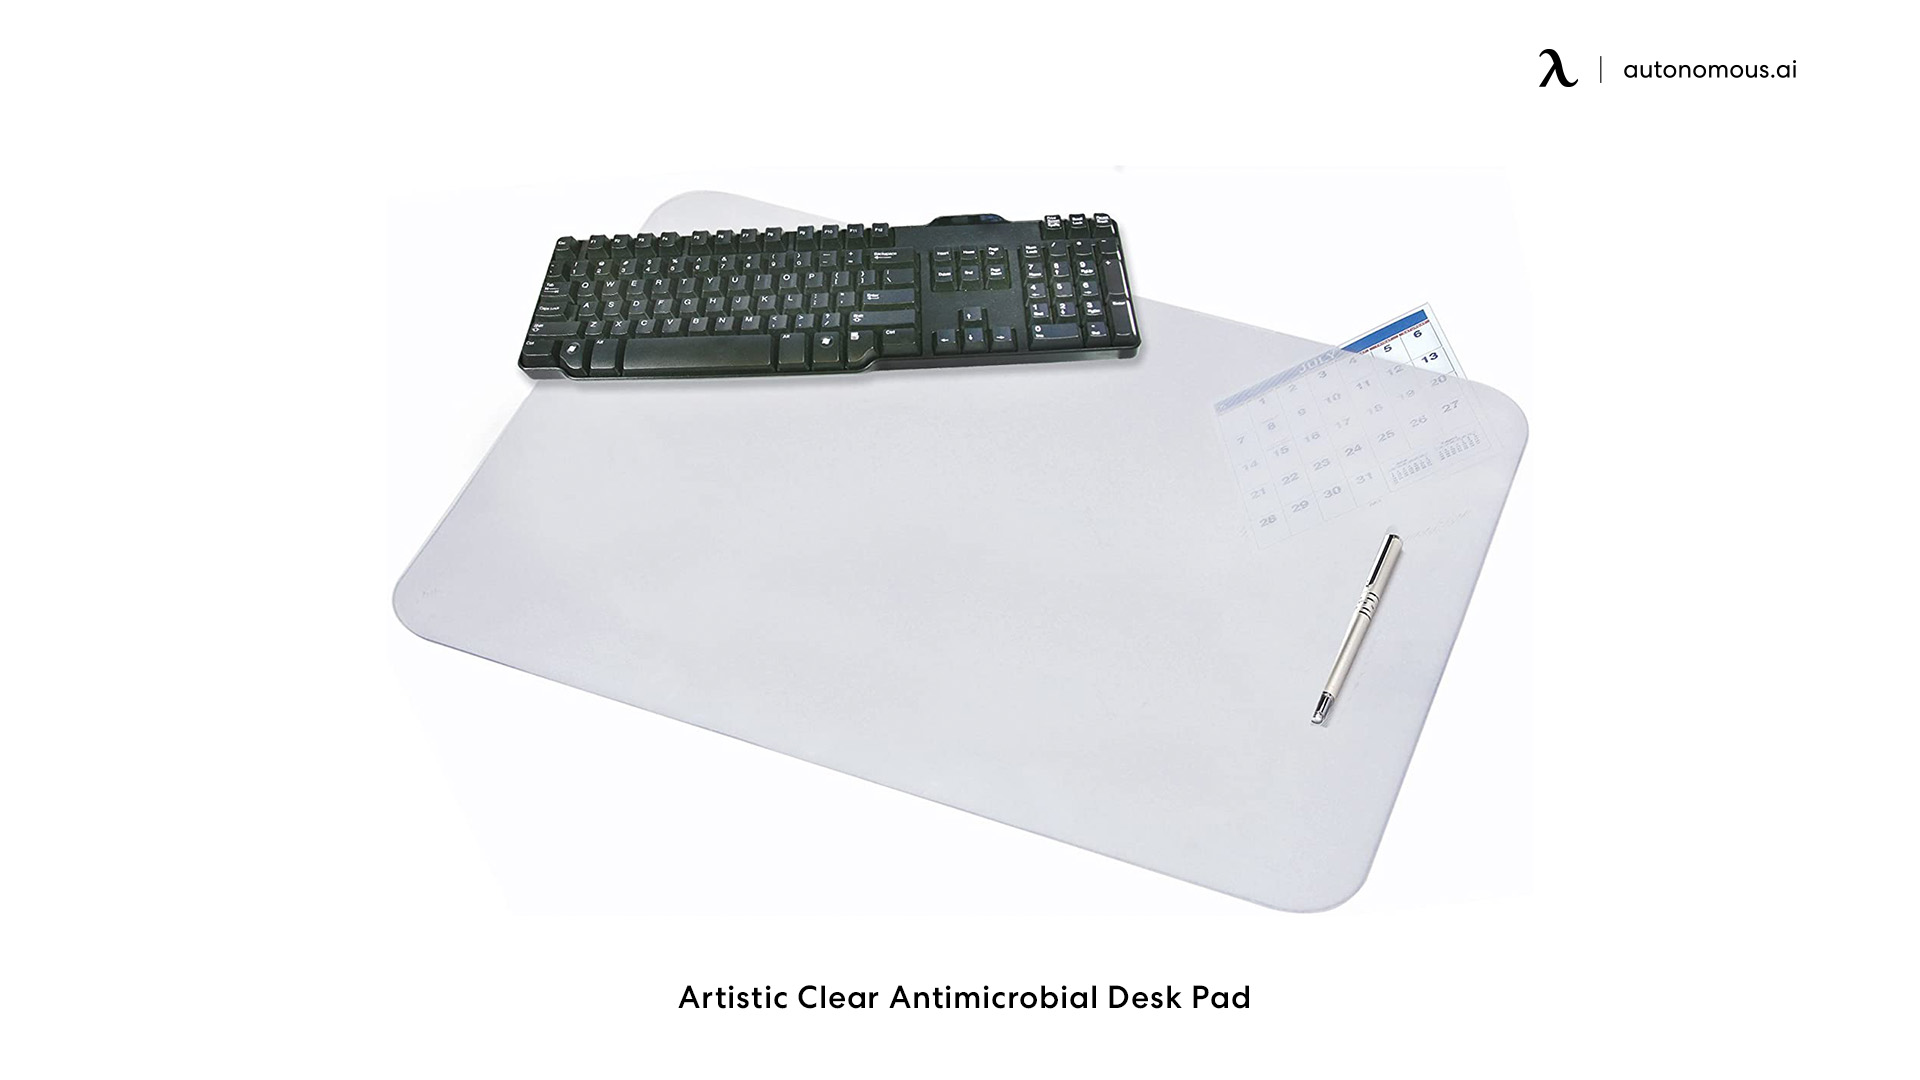 Artistic Clear Antimicrobial Desk Pad